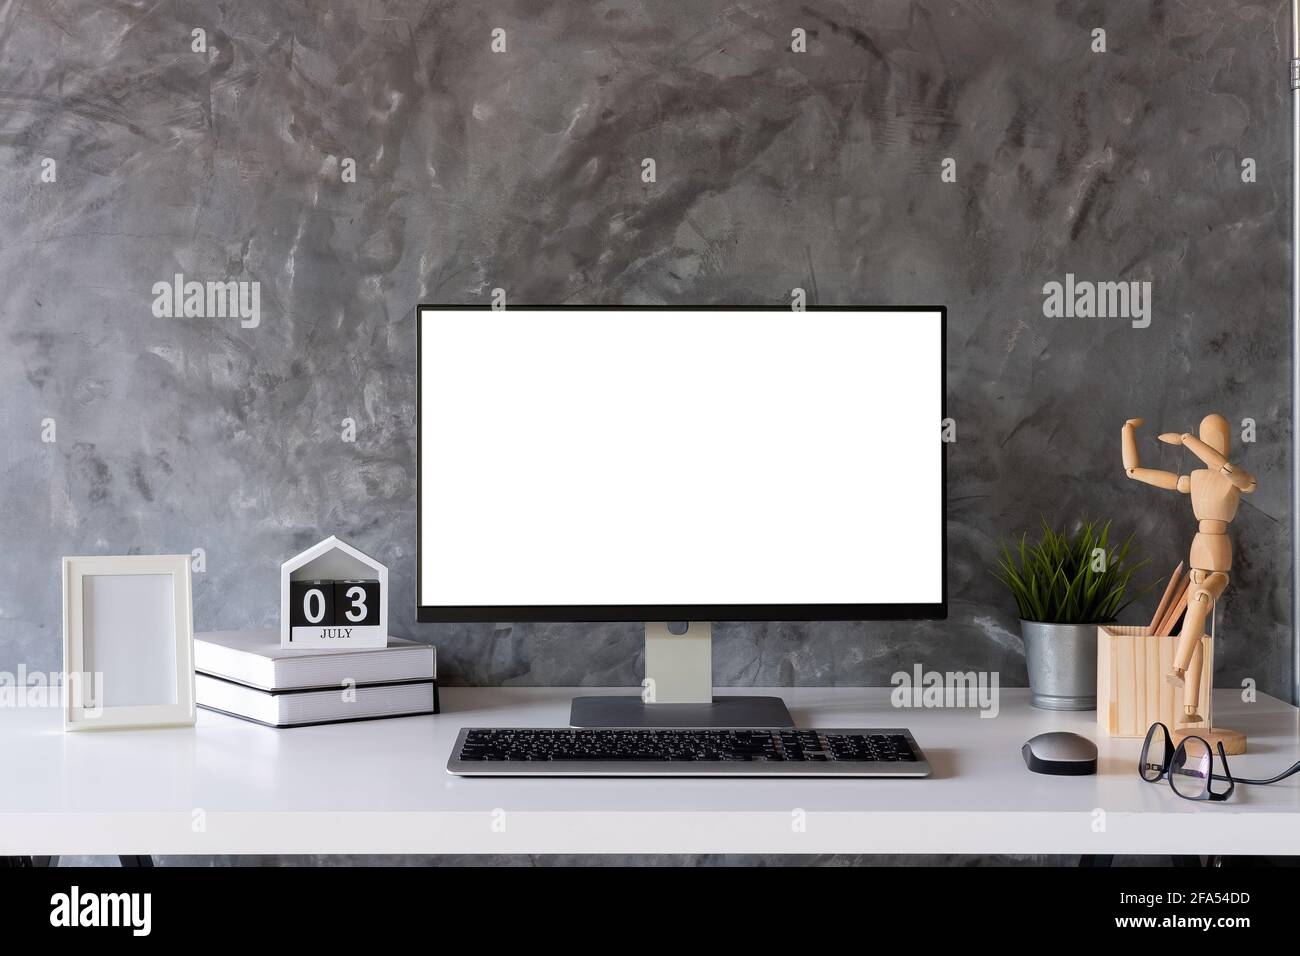 Mock up : Stylish or designer workspace with desktop computer, creative supplies, houseplant and vintage books on white work table at home or studio Stock Photo